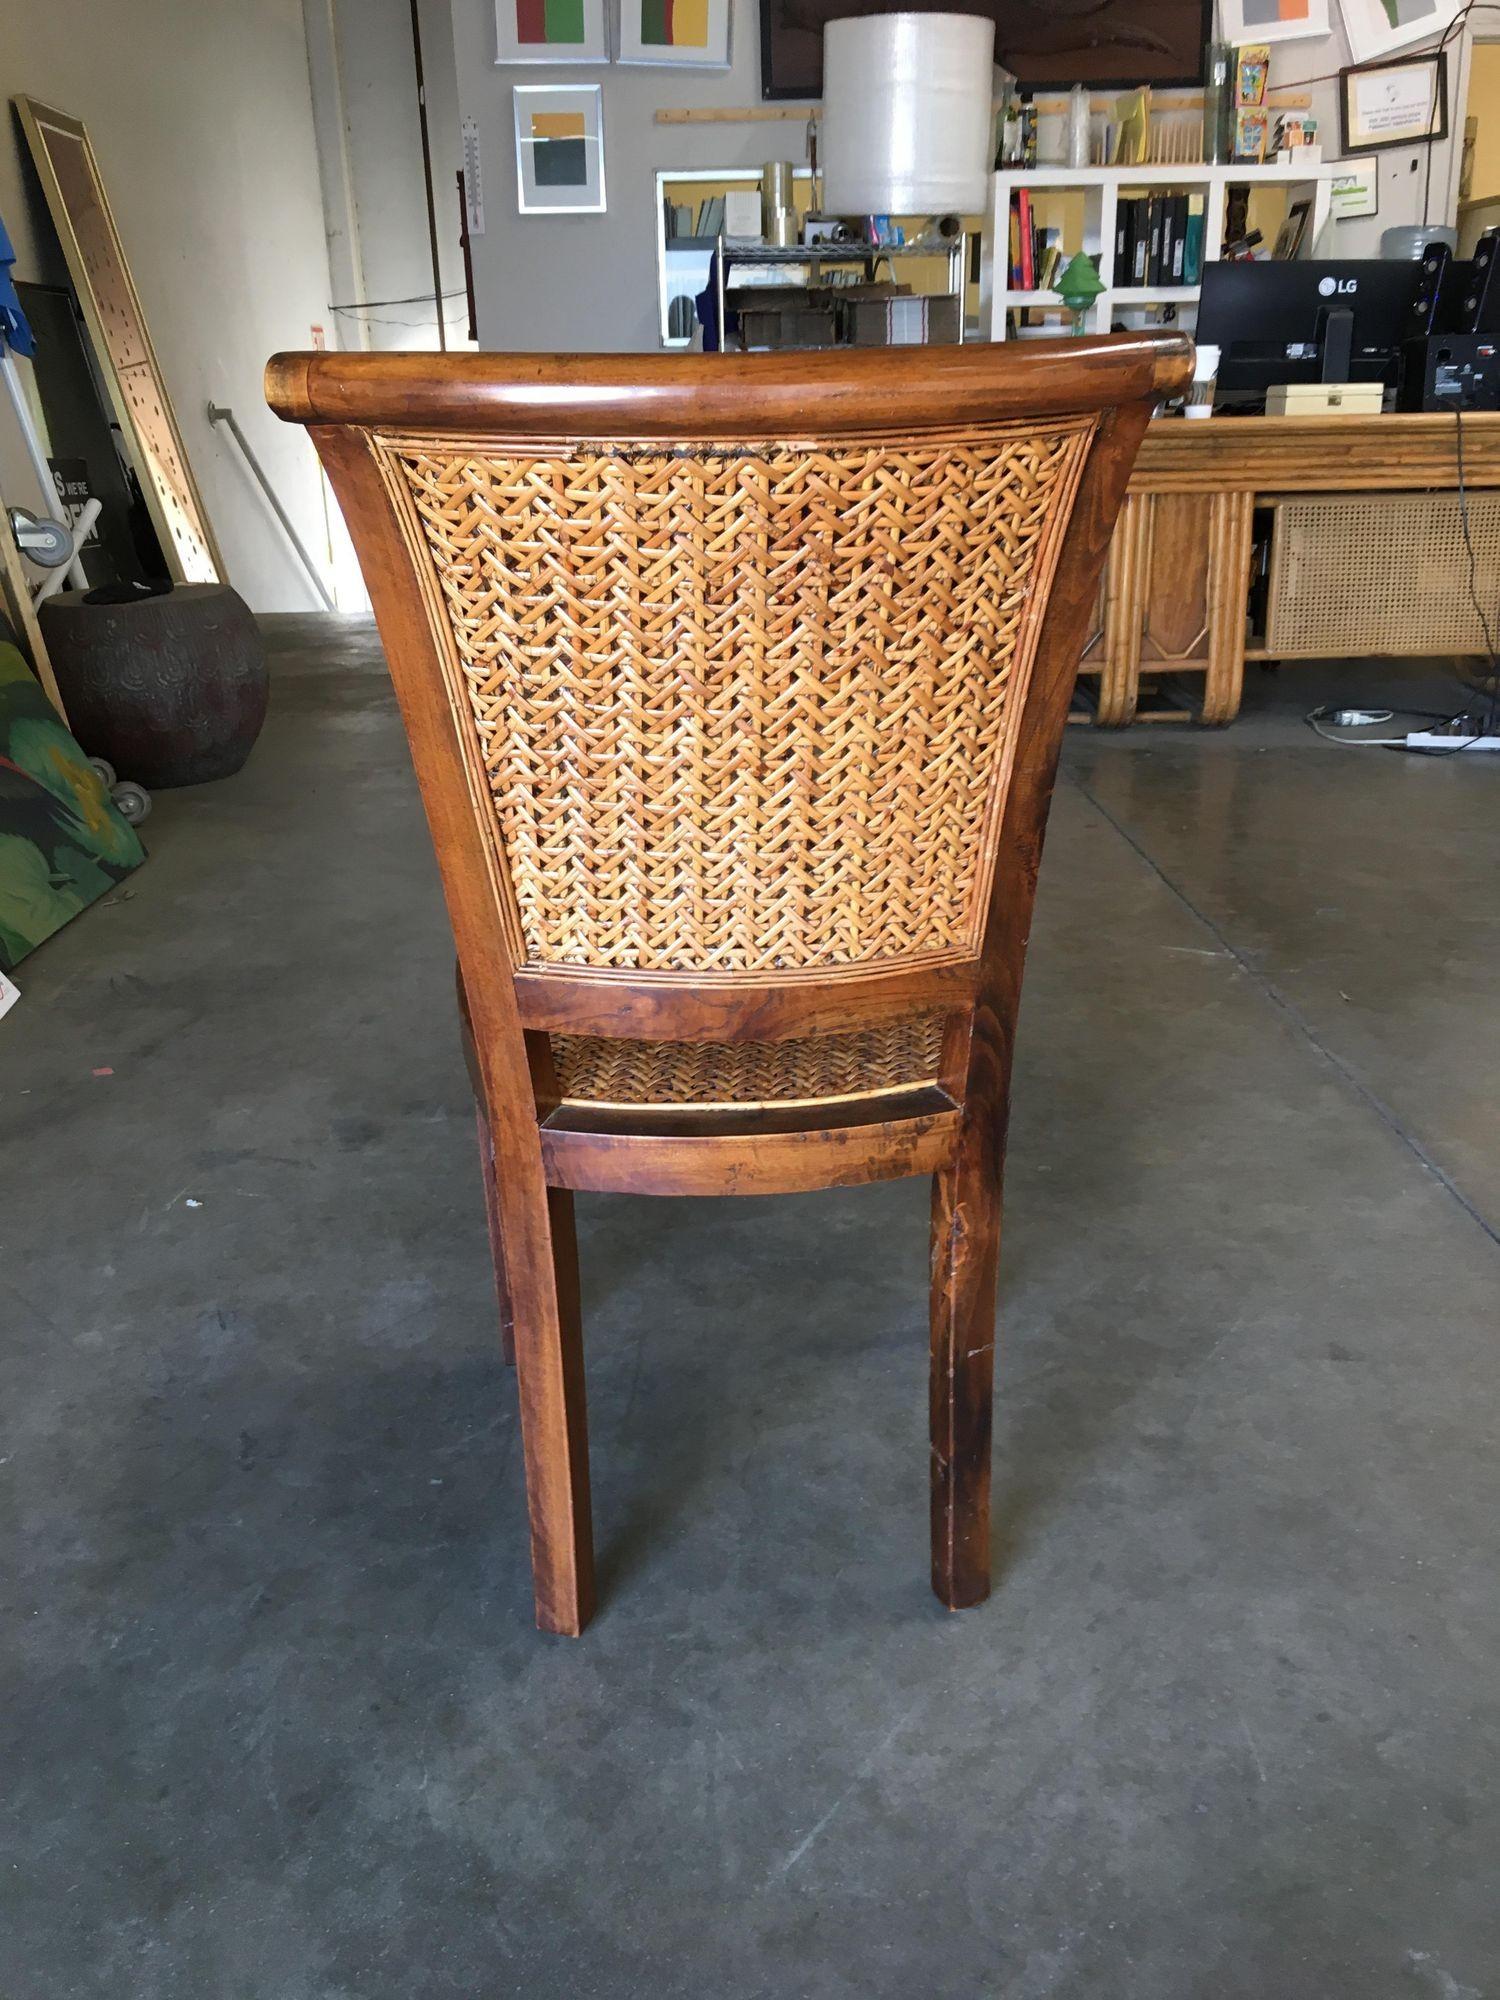 Mid-20th Century High Style Midcentury Mahogany Dining Chair with Woven Wicker Seat For Sale